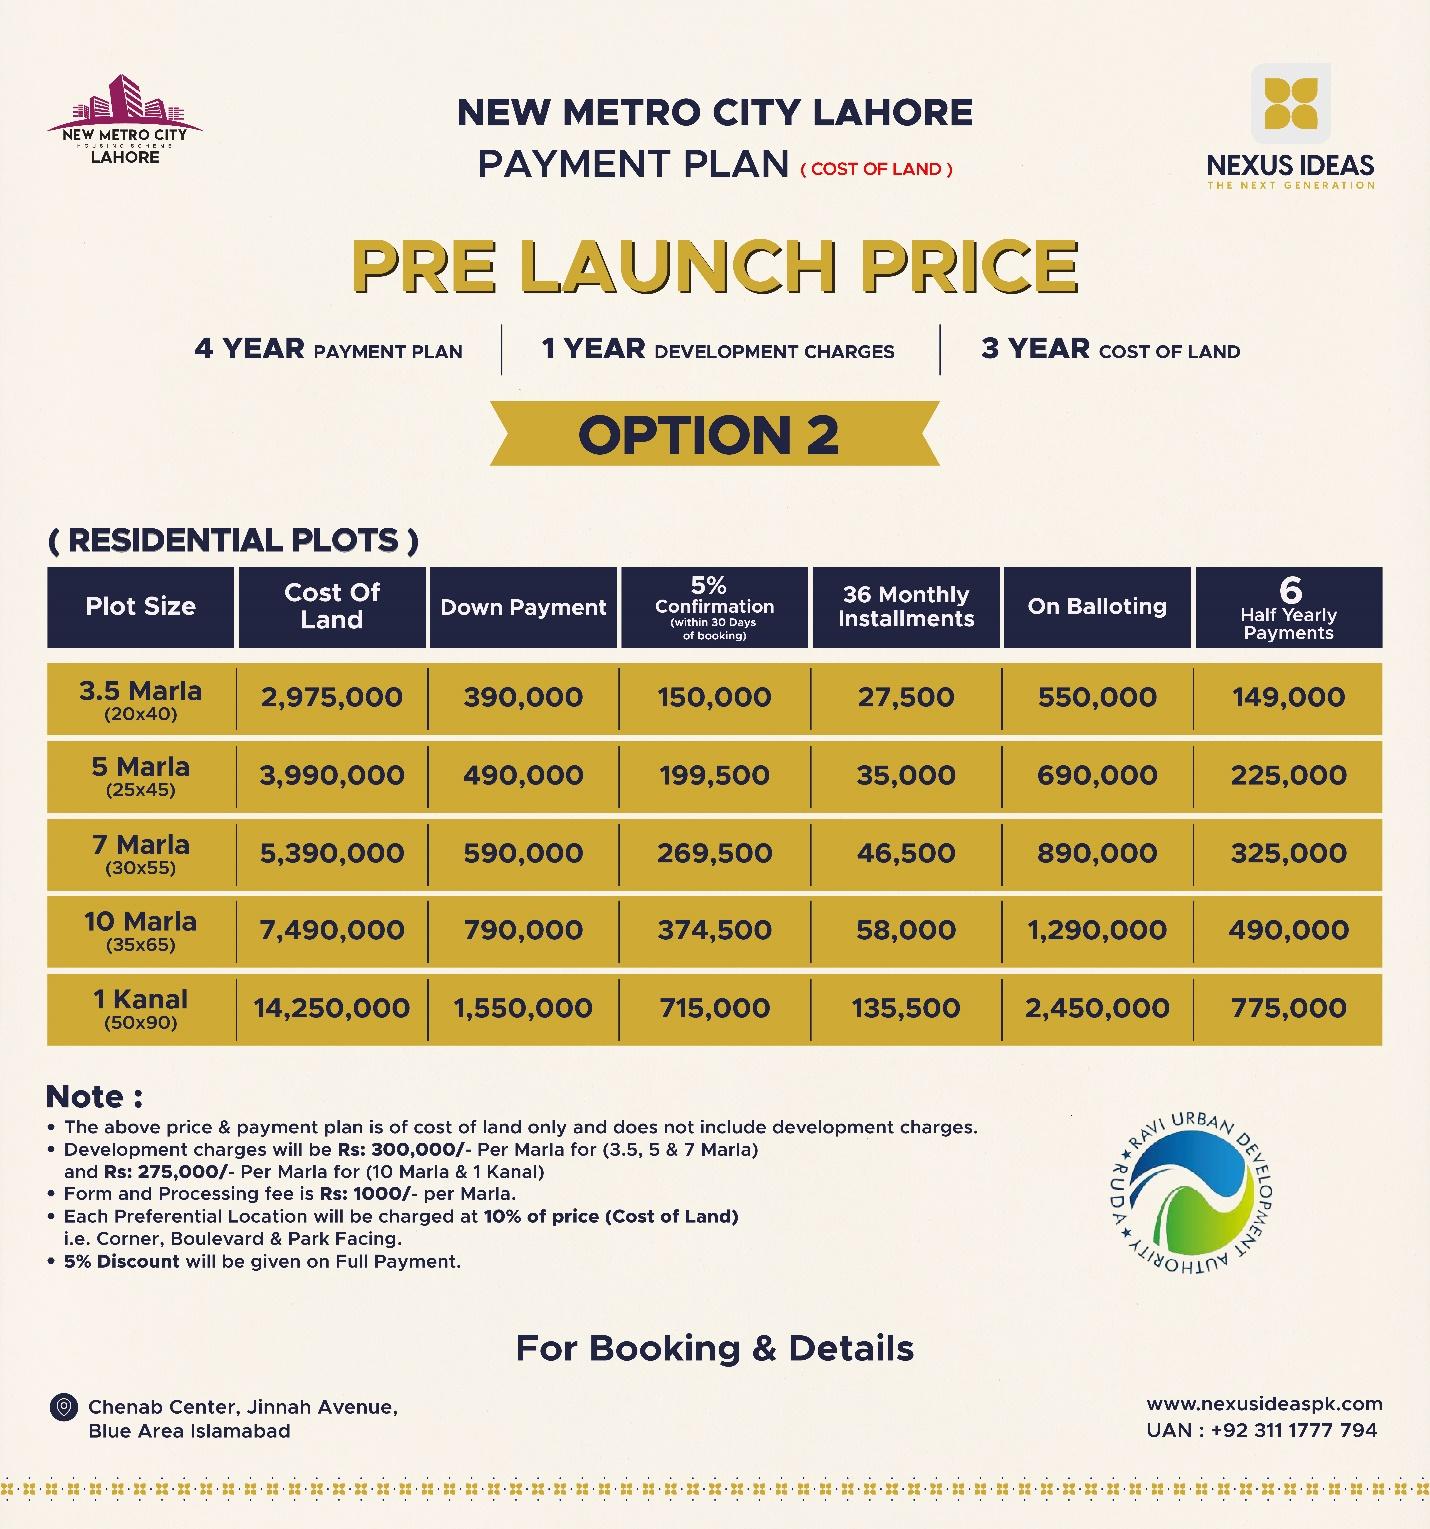 New Metro City Lahore Payment Plan